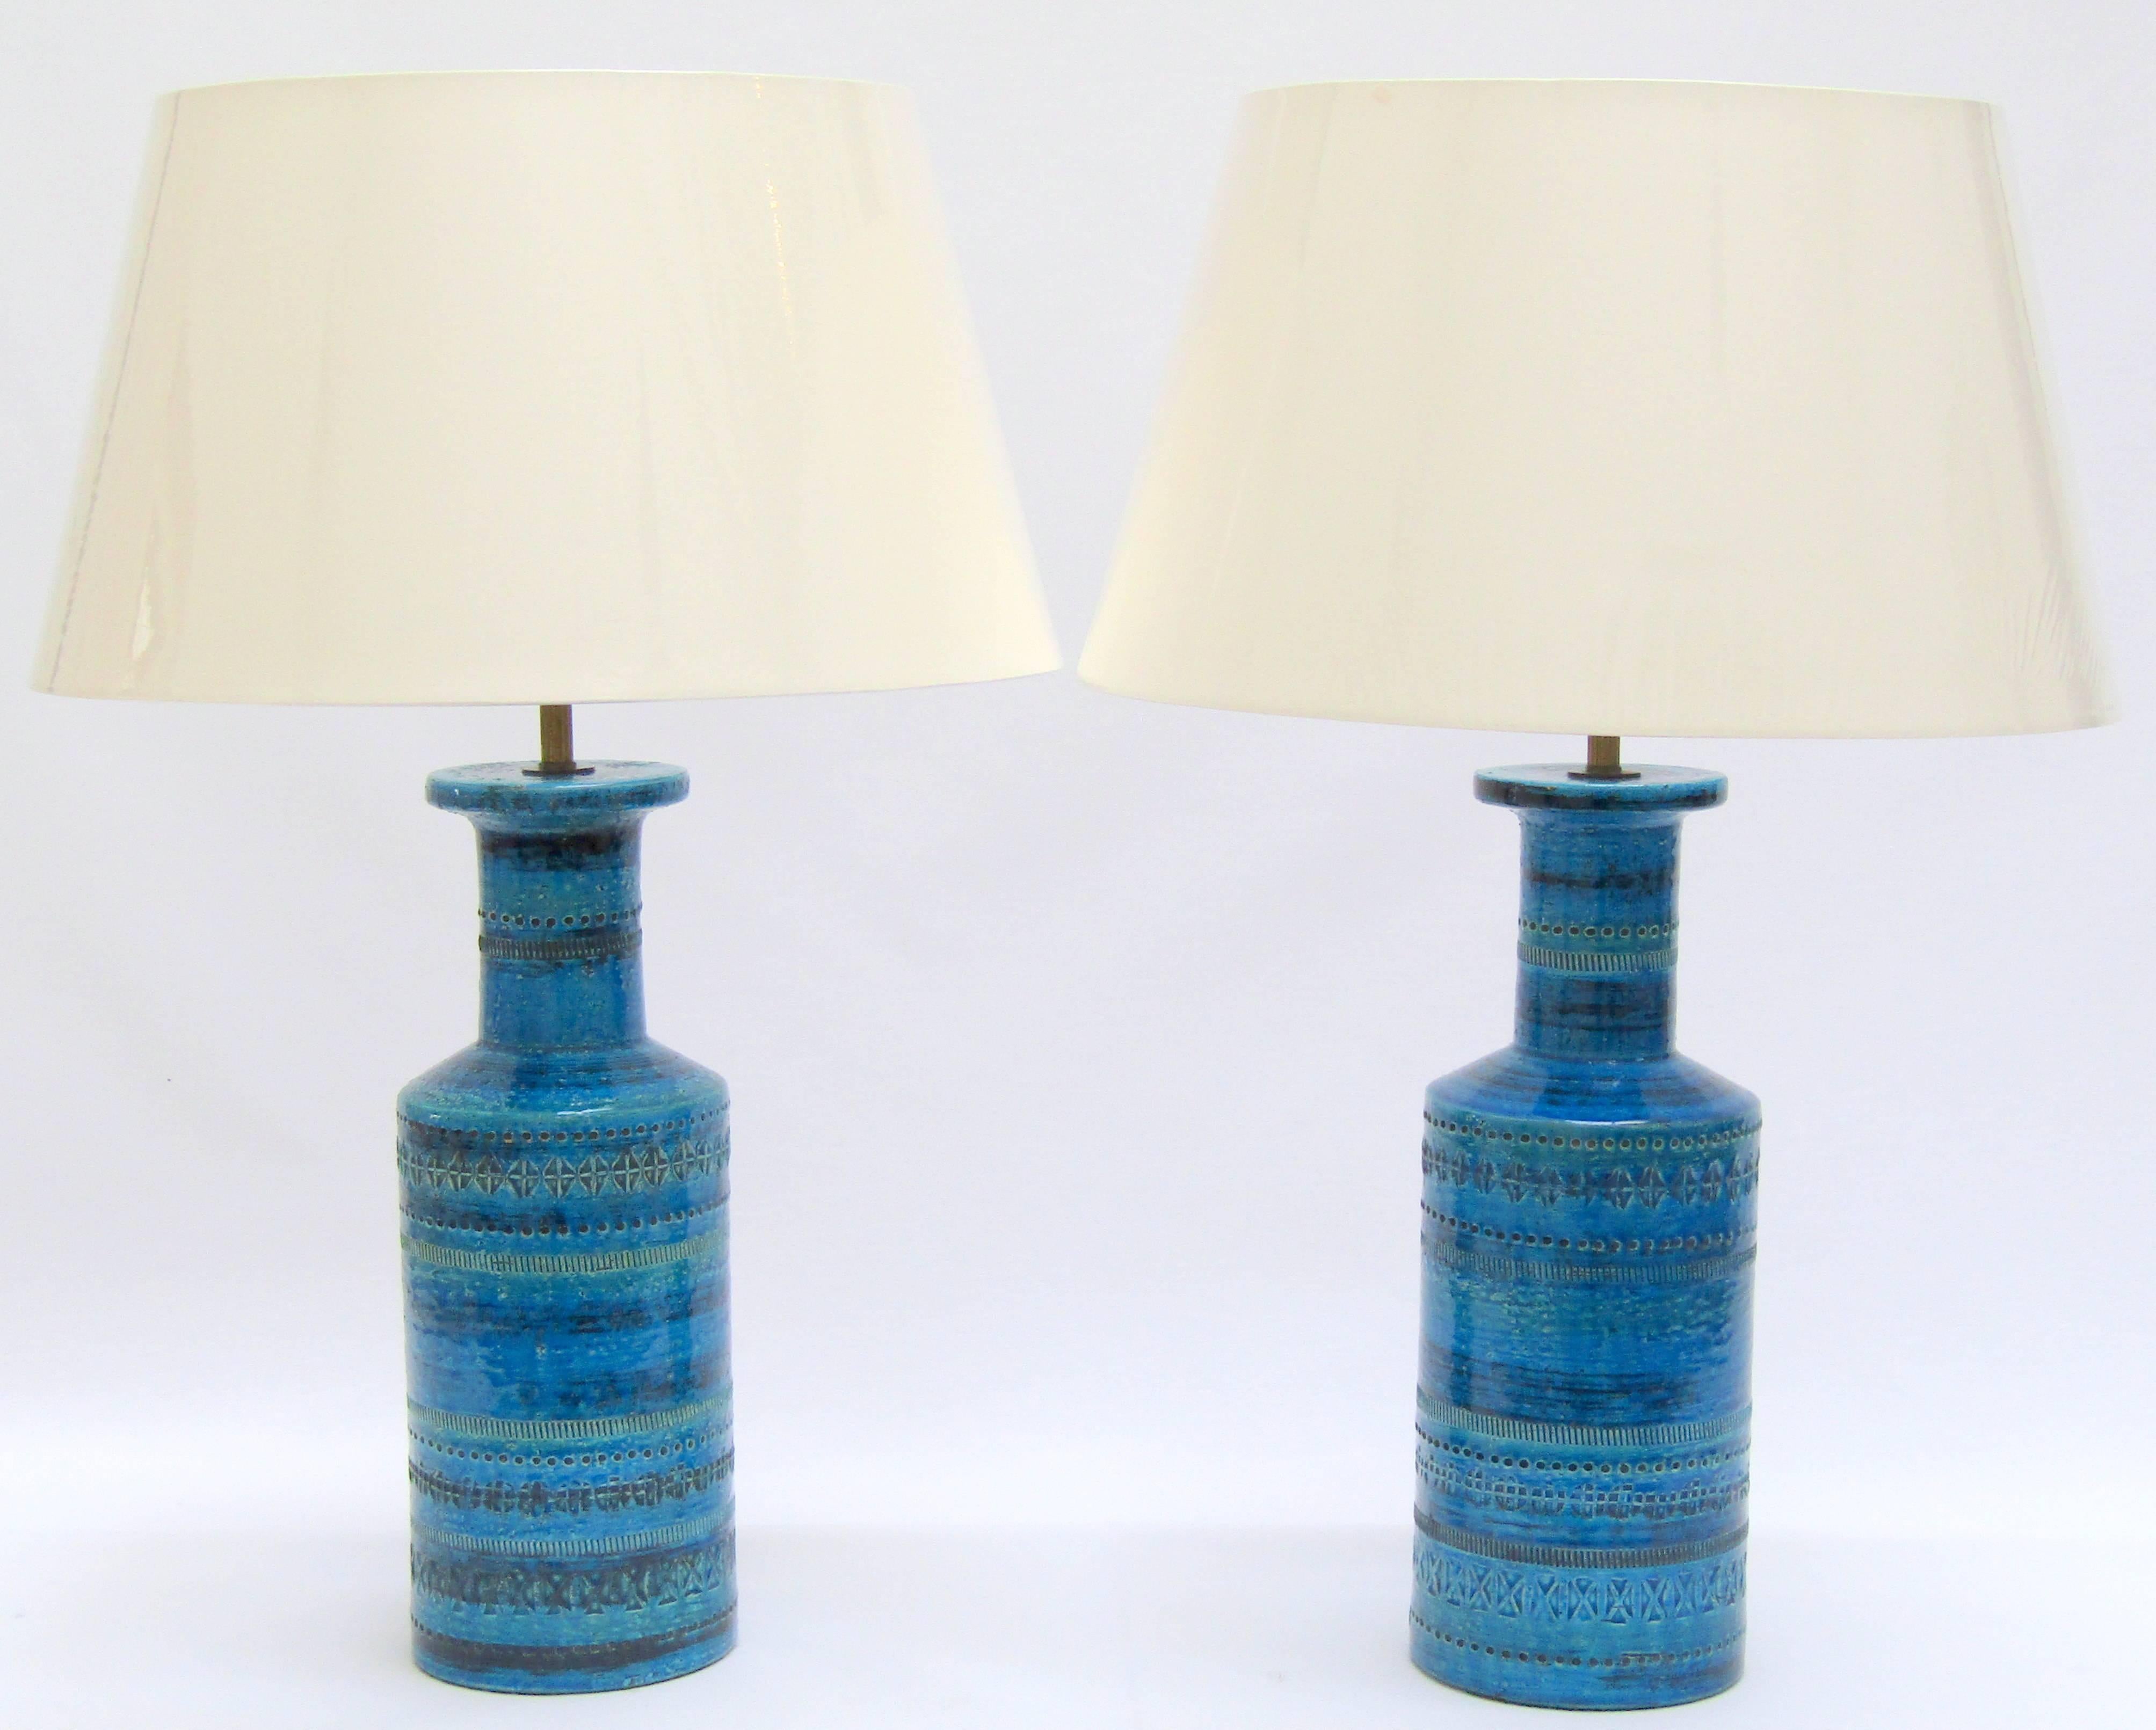 A pair of ceramic Rimini blue table lamps
Designed by Aldo Londi for Bitossi
Re-wired and PAT tested
Modern shades
Italian, circa 1960

Measures: Height 13 ¾ in / 35 cm without shade
 24 in / 61 cm including shade.